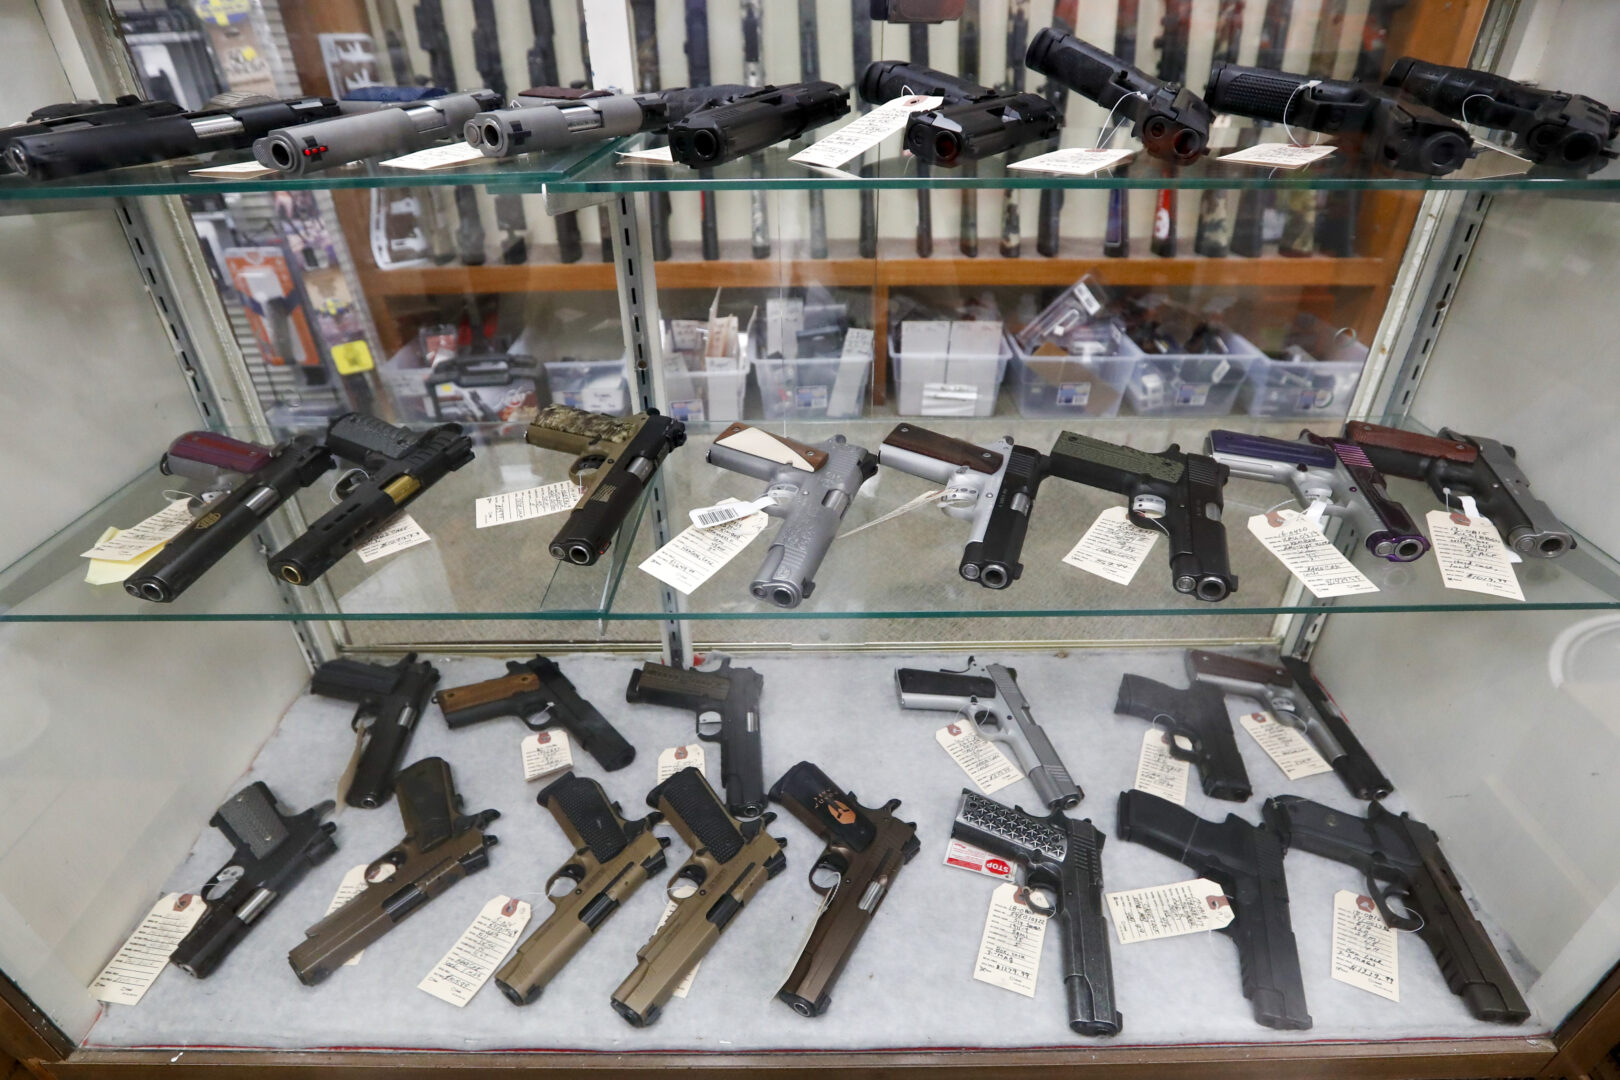  Semi-automatic handguns are displayed at shop in New Castle, Pa., March 25, 2020.   (AP Photo/Keith Srakocic, File)